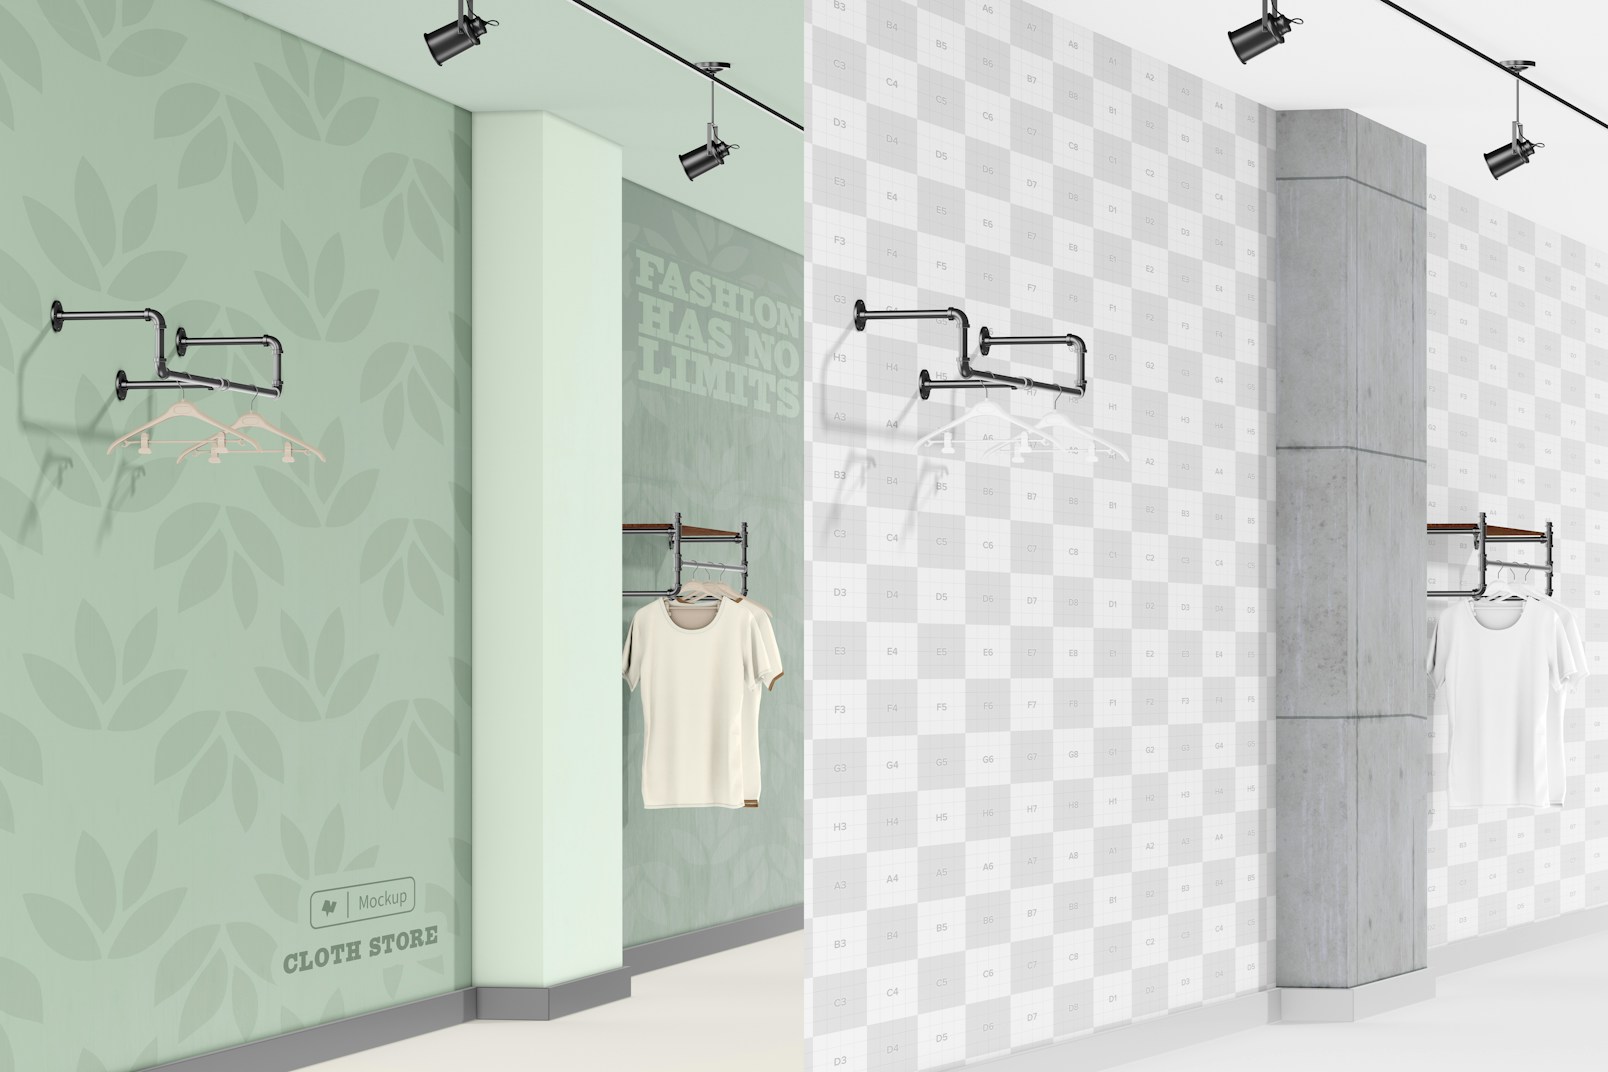 Industrial Cloth Store Mockup, Right View